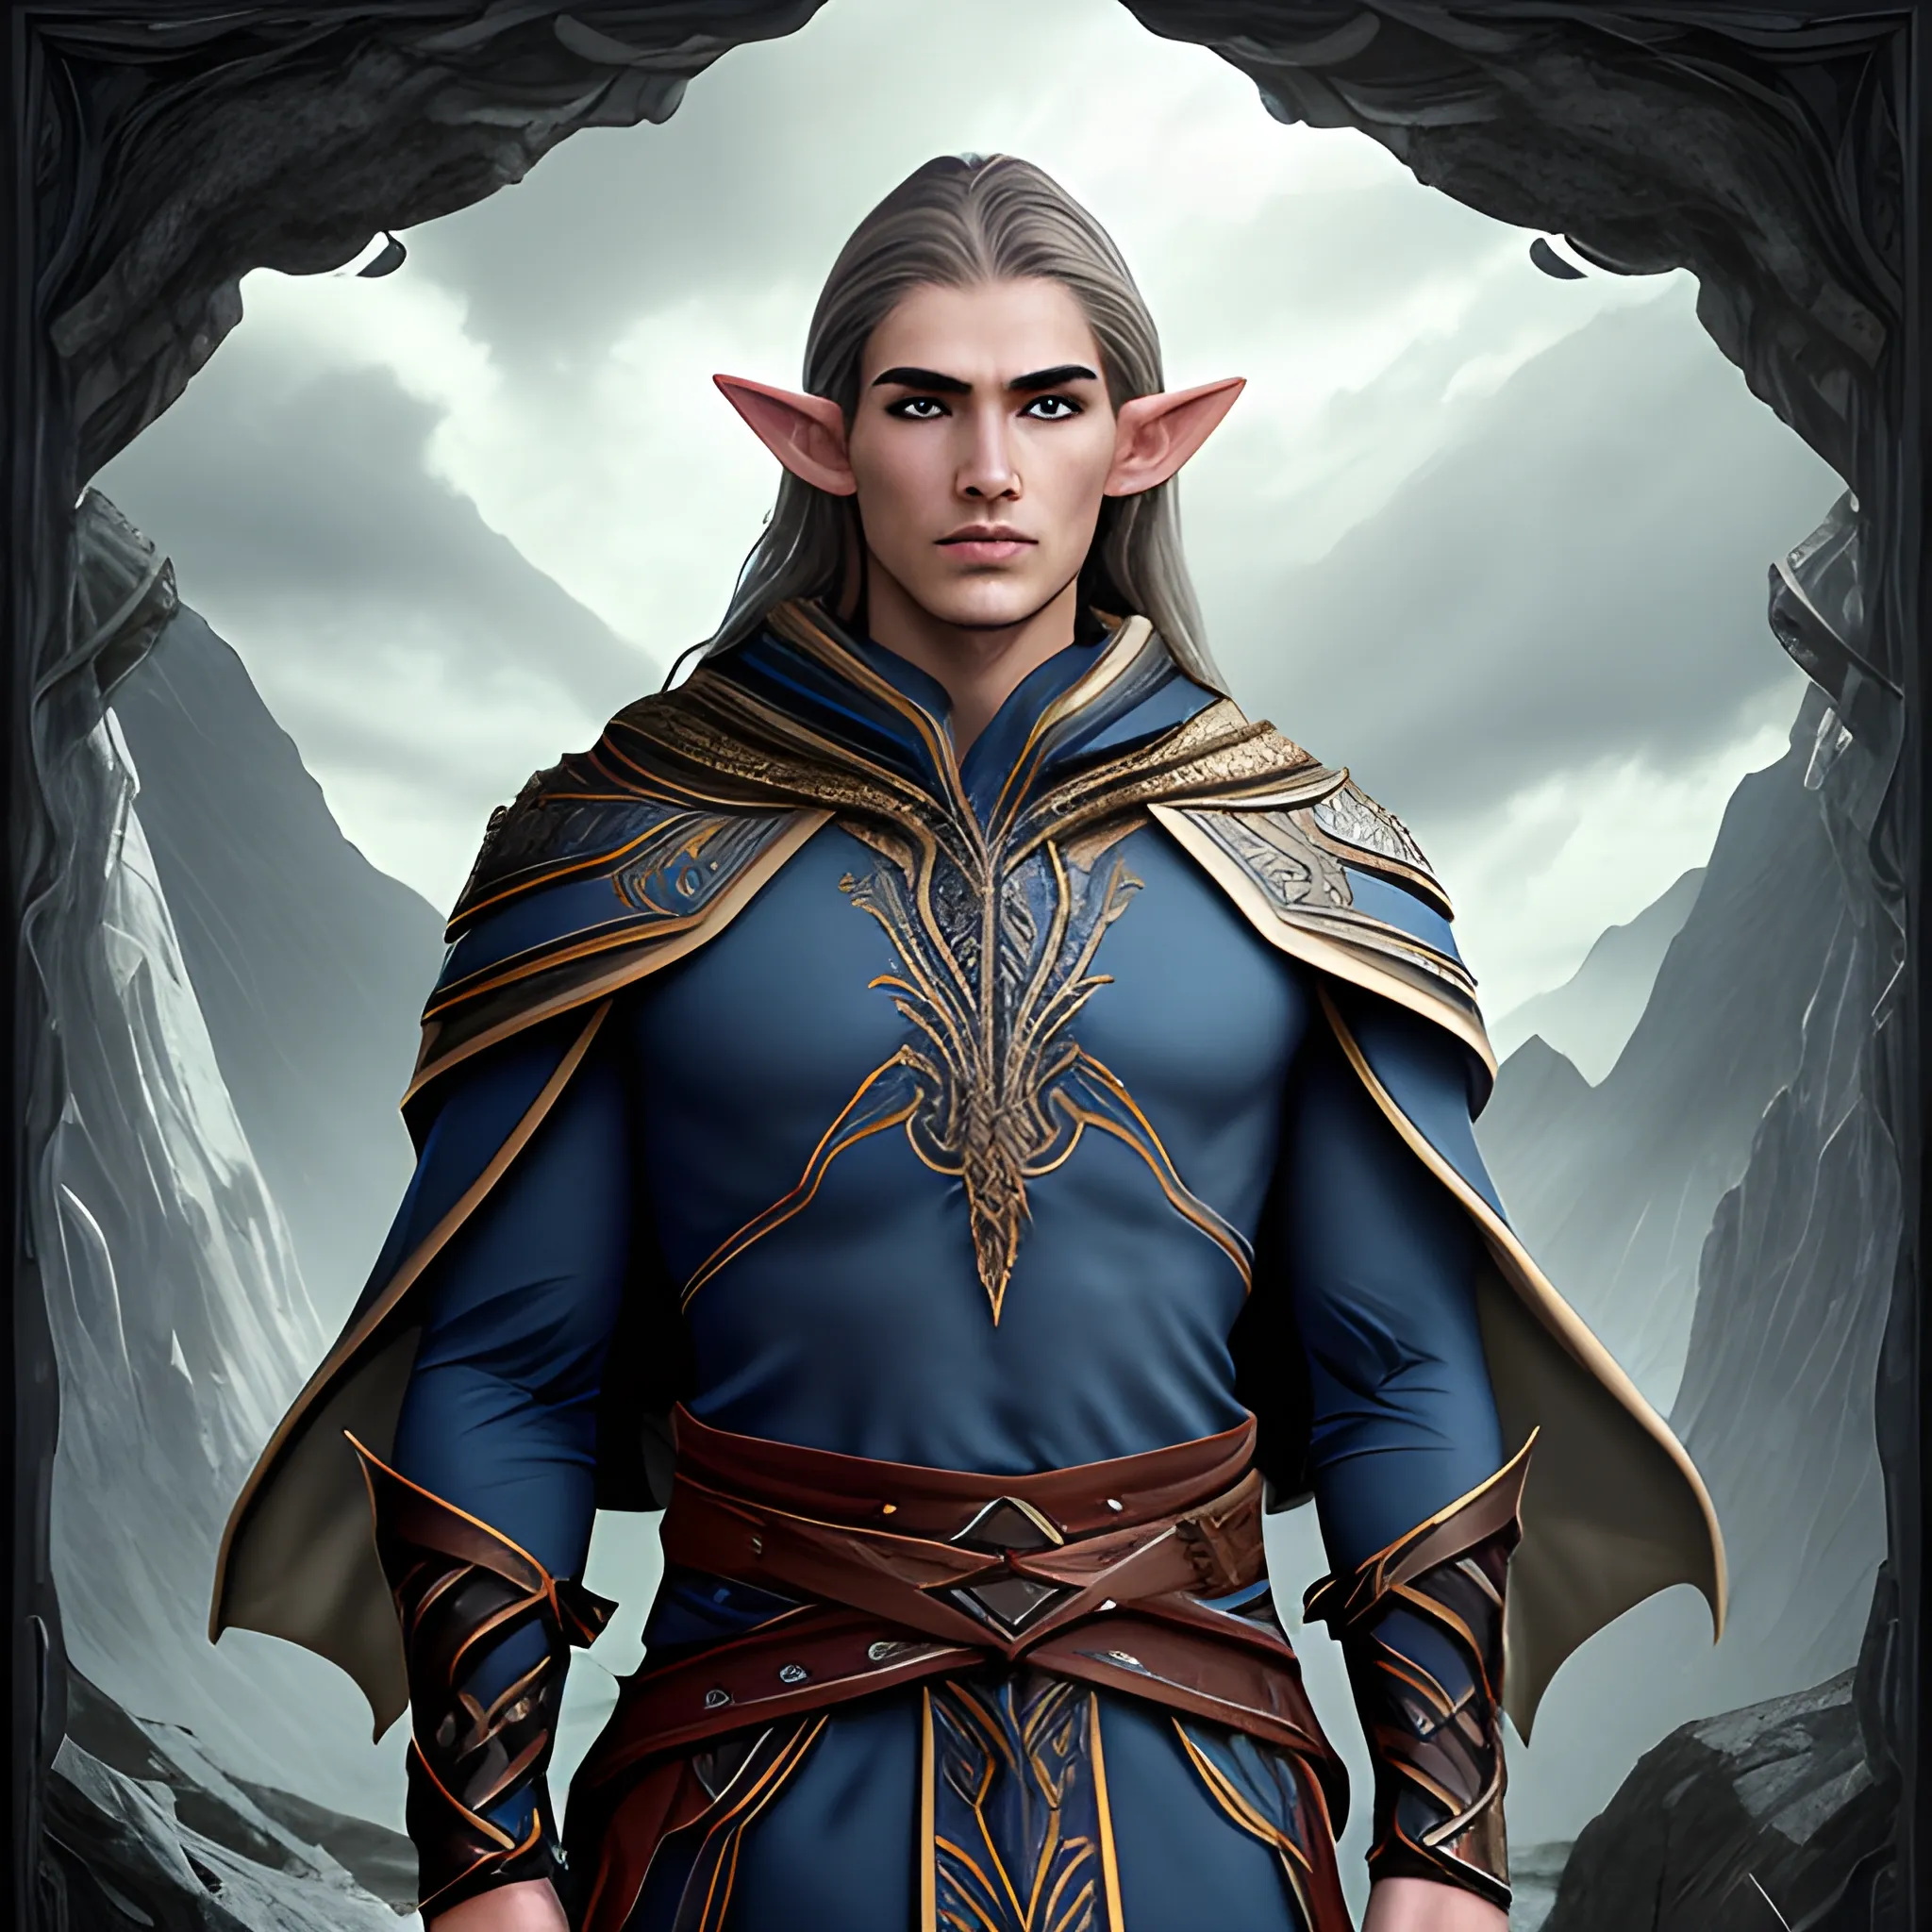 Kaelen Stormrider possesses a commanding presence, enhanced by his unique combination of elven and human features. Standing at a moderate height, he exudes an air of confidence and strength. His physical appearance reflects his diverse heritage, incorporating the elegance of the elves and the resilience of humans.

Kaelen's facial features are a harmonious blend of refined elven beauty and rugged human strength. His face is framed by dark, wavy hair that falls to his shoulders, accentuating his sharp cheekbones and a strong jawline. His fair skin, tinged with a hint of warmth, highlights the intensity of his piercing eyes.

His eyes, a vibrant shade of sapphire blue, are often described as windows to his soul. They emanate an aura of determination and unwavering focus, reflecting the celestial energies that course through his veins. They are framed by well-defined eyebrows, adding a touch of intensity to his gaze.

Kaelen's physique is lean yet muscular, a testament to his physical prowess and the rigorous training he has undergone. He carries himself with a confident posture, exhibiting a natural grace that hints at his elven heritage. His movements are fluid and precise, a reflection of the martial discipline he has cultivated.

Draped upon his broad shoulders, Kaelen often wears a cloak of deep blue, adorned with intricate silver trimmings that depict celestial motifs. The cloak billows behind him, evoking an image of a storm on the horizon, as if he is a harbinger of both power and tranquility. His attire consists of practical yet finely crafted garments that allow for ease of movement during combat, blending elements of elven elegance and practical human design.

Kaelen's presence is both captivating and enigmatic, drawing the attention of those around him. With his elven grace, human strength, and a gaze that holds the weight of determination, he stands as a formidable figure, ready to face the challenges that lie ahead on Lumina Isle.